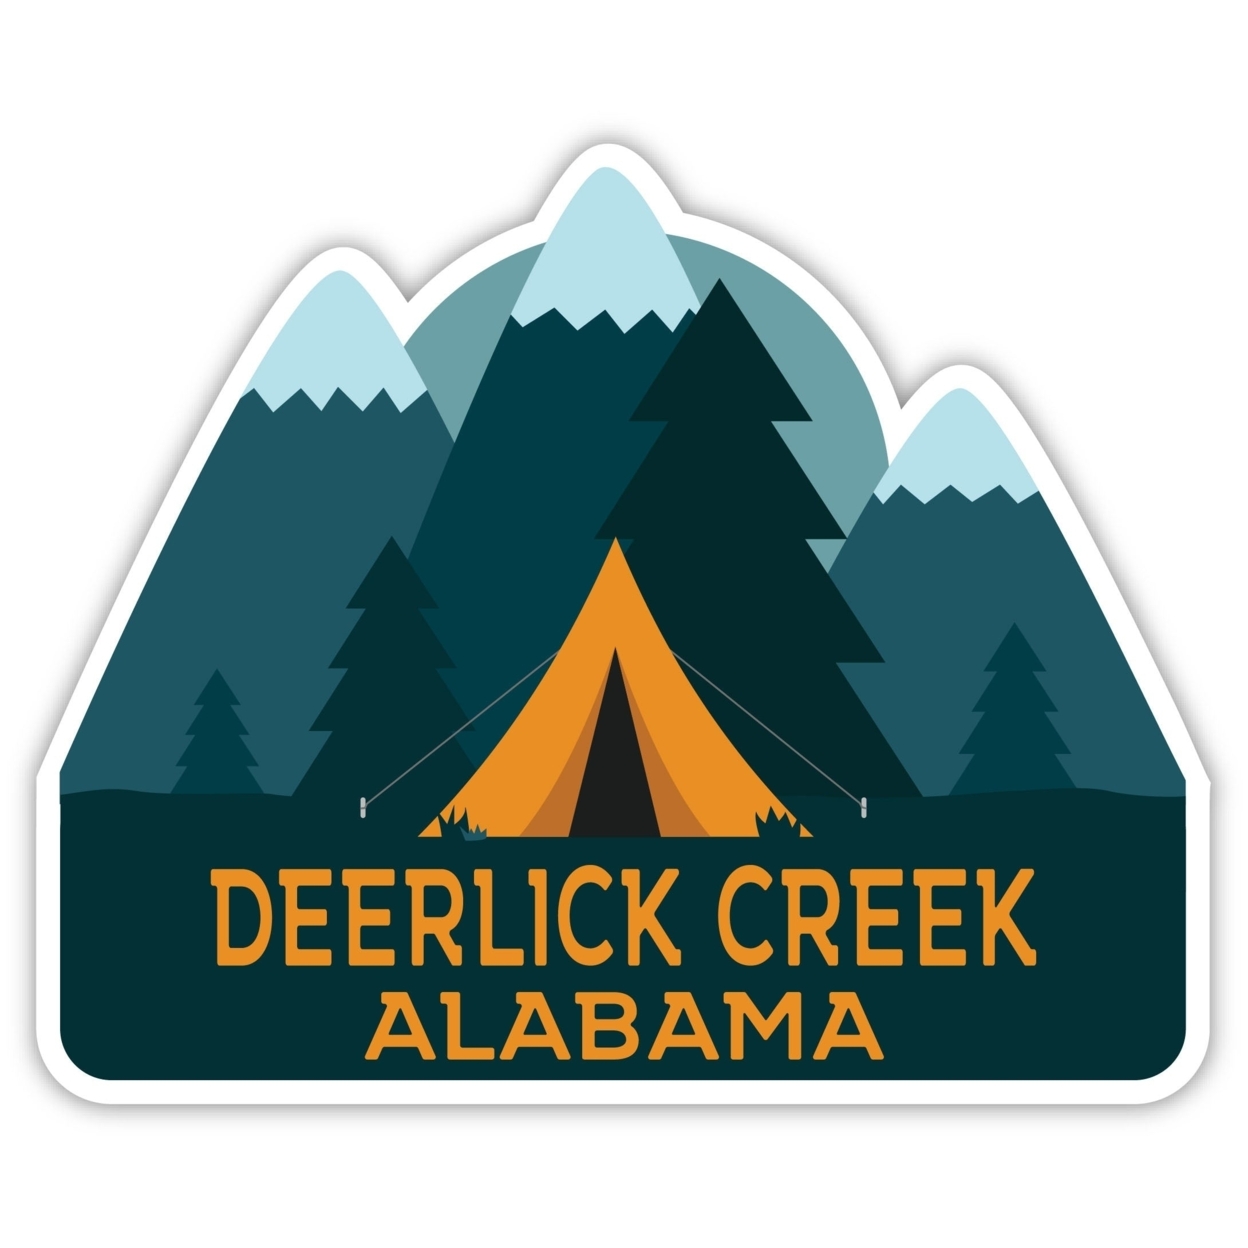 Deerlick Creek Alabama Souvenir Decorative Stickers (Choose Theme And Size) - 4-Pack, 10-Inch, Tent